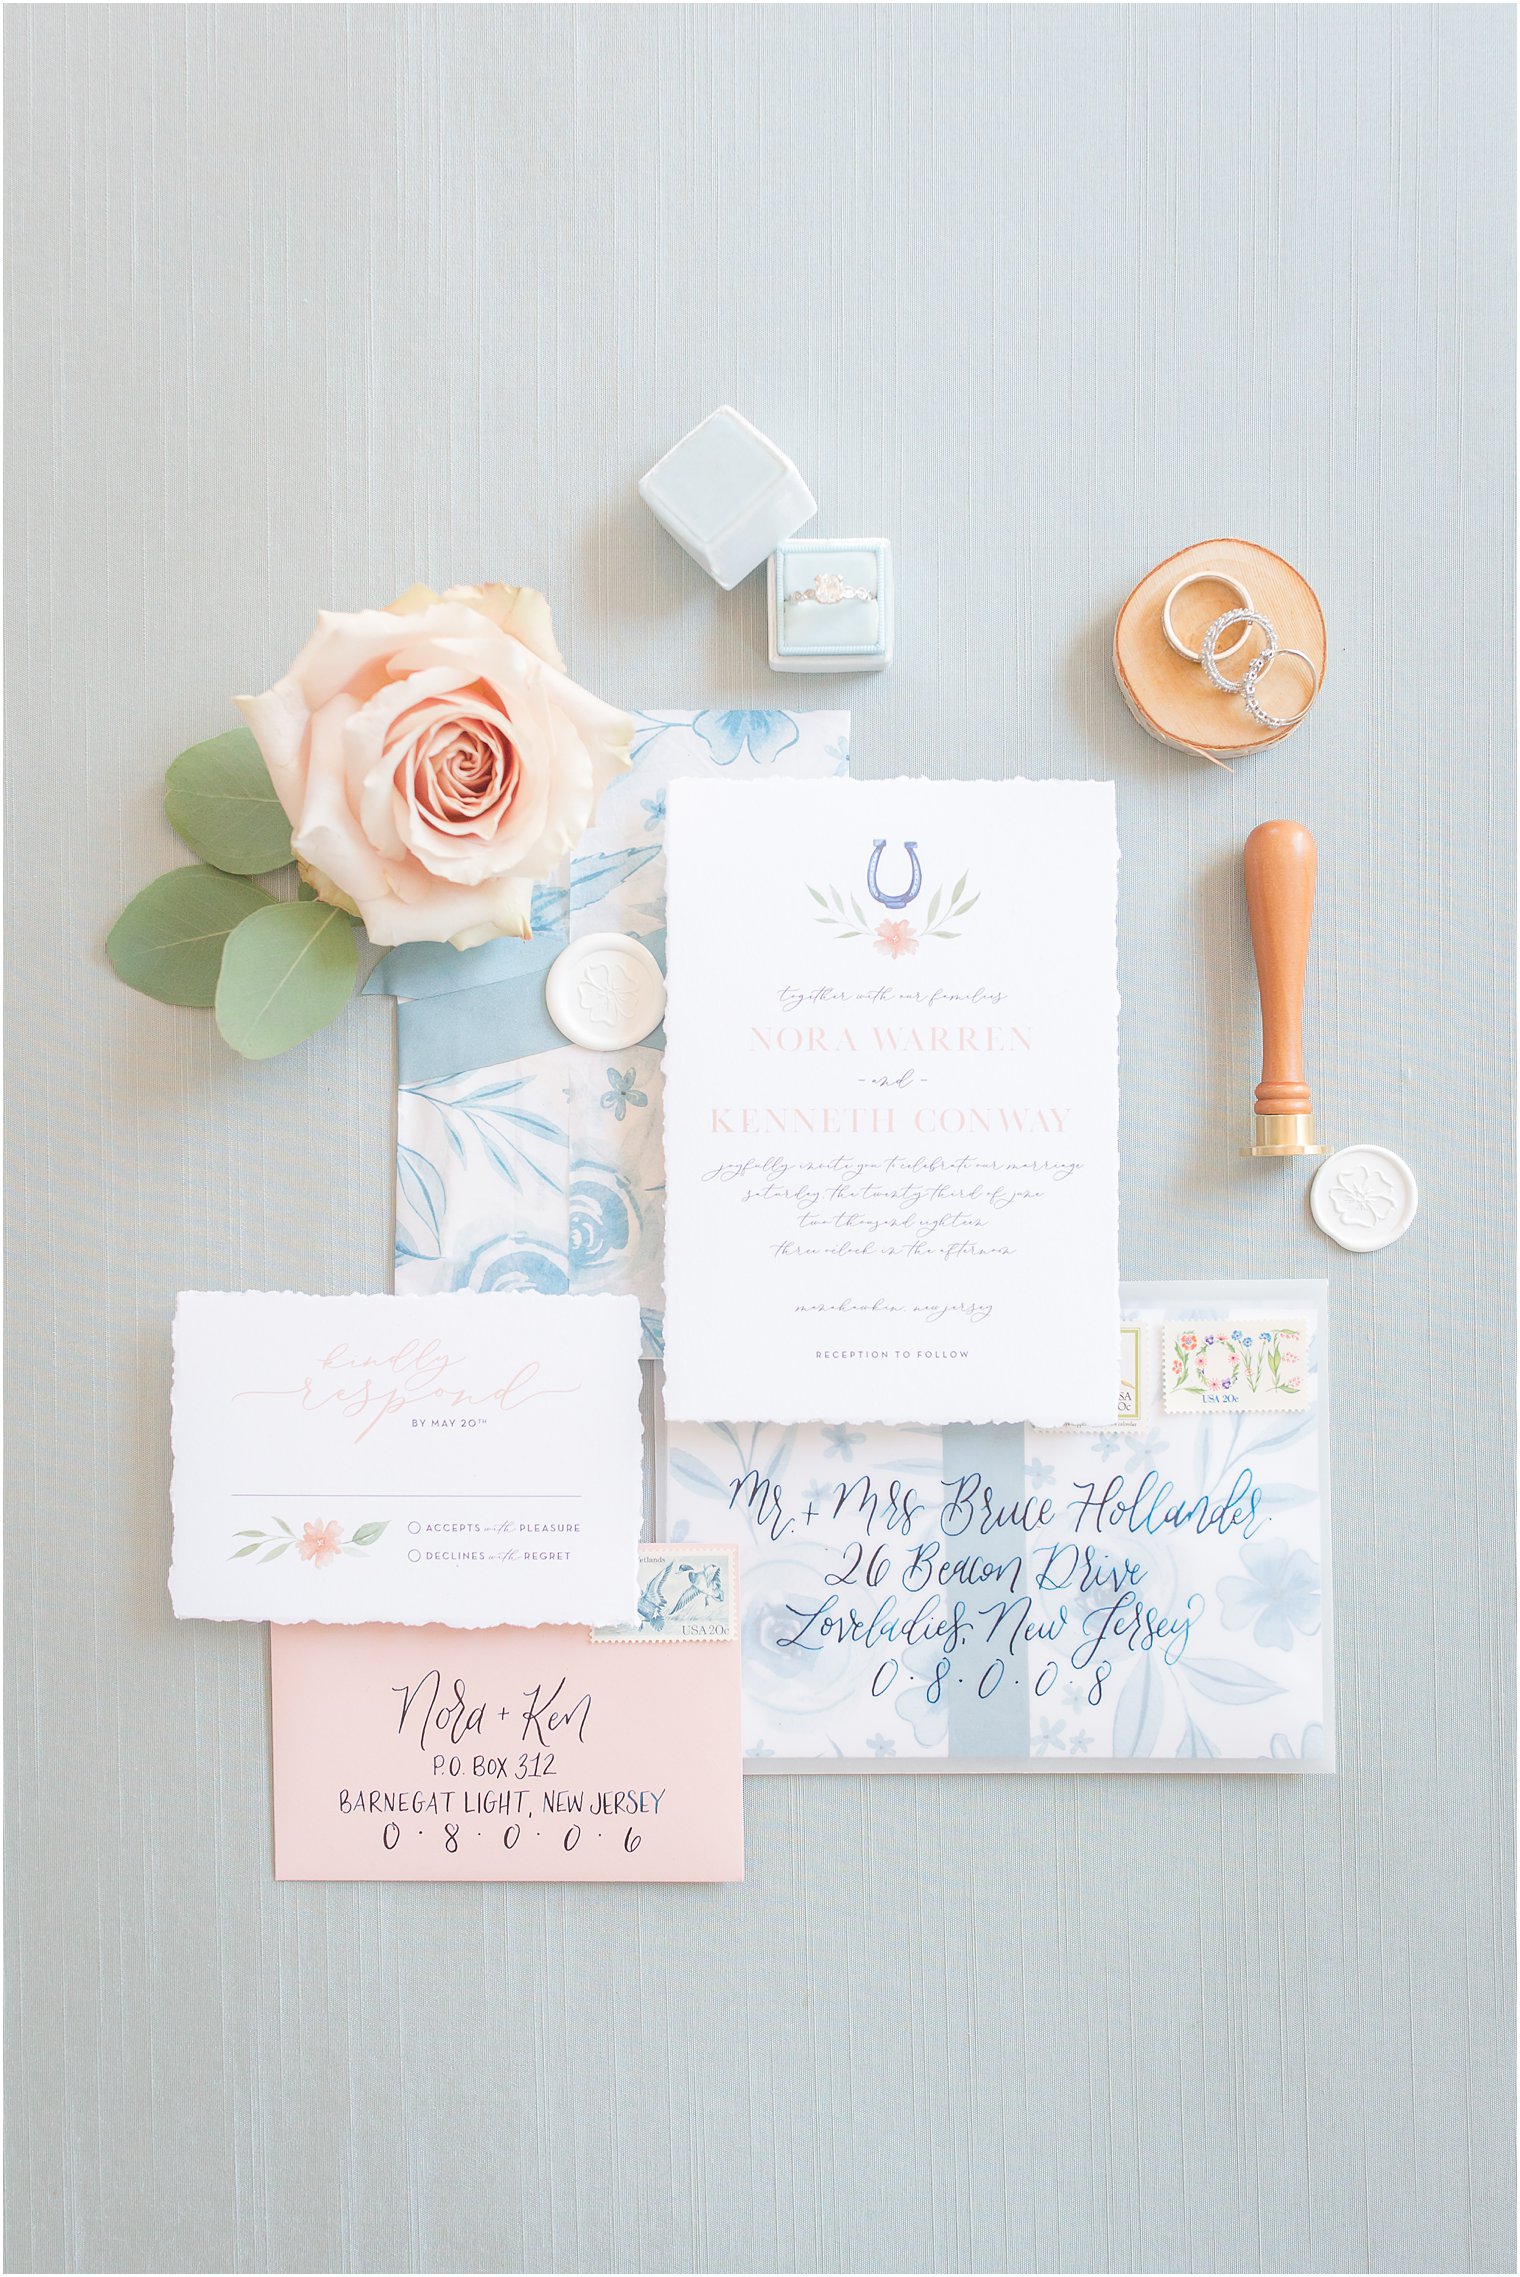 Wedding invitation with blue hues and vellum | Created by Crisp by Britt